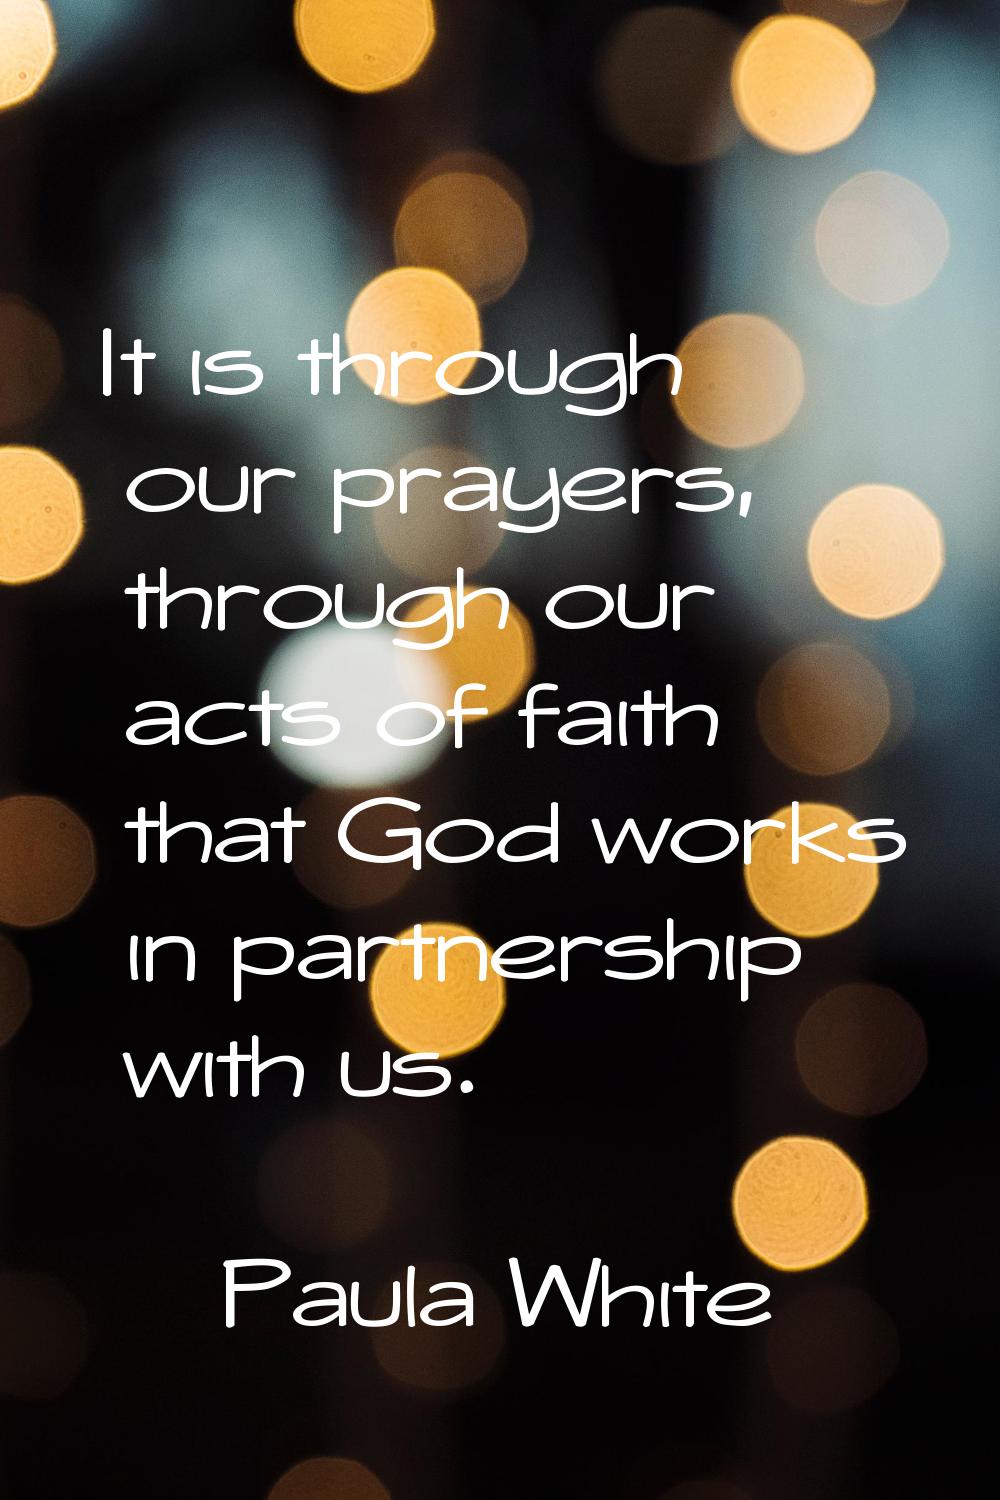 It is through our prayers, through our acts of faith that God works in partnership with us.